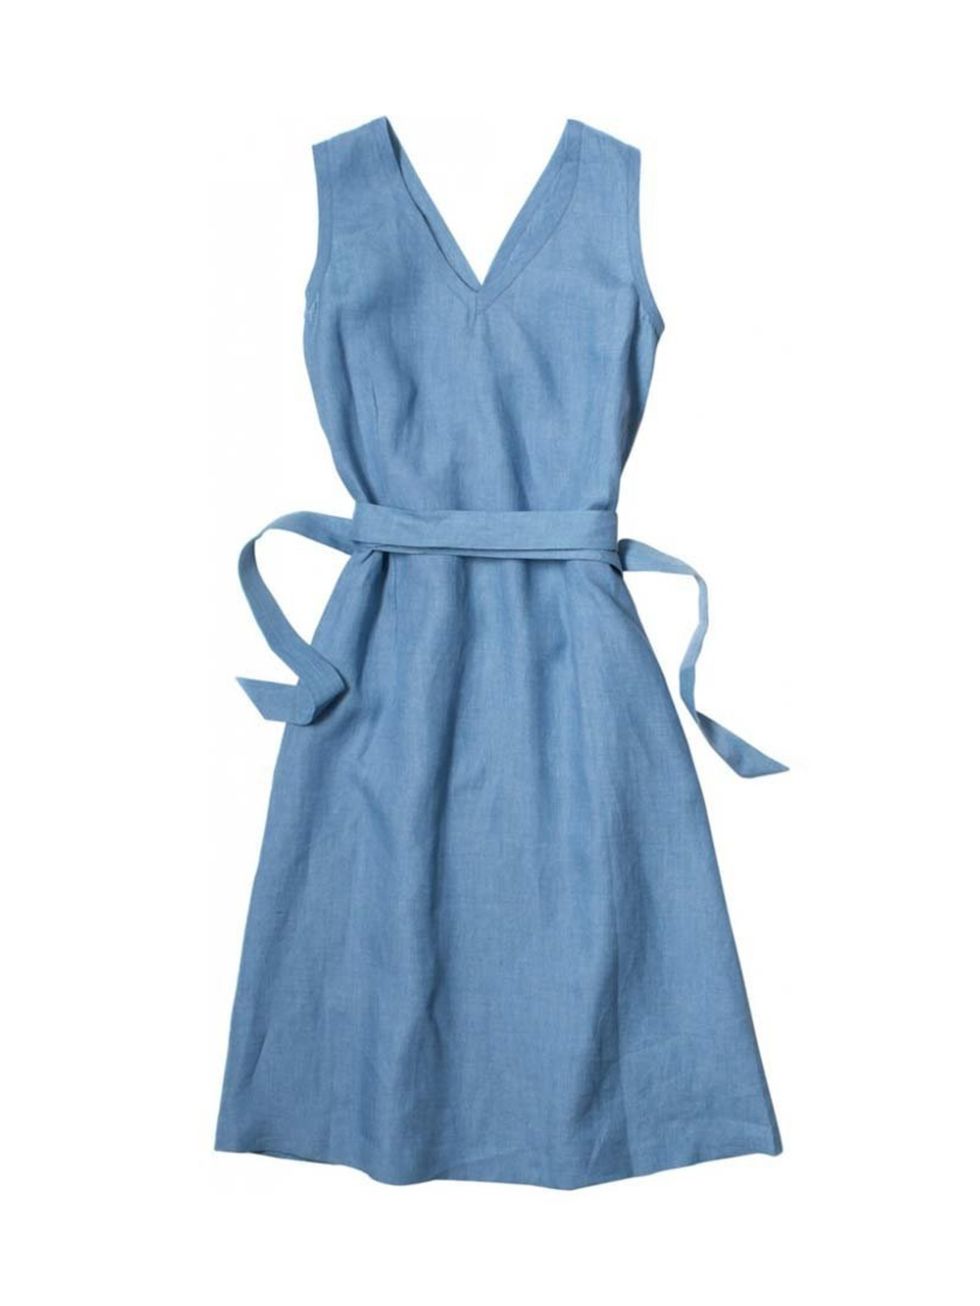 <p>This understated, beautifully-cut blue linen tunic is all that we want to wear this summer, with white plimsolls or tan sandals. Layer on a chunky-knit oatmeal cardi while the weather's still cool. </p><p><a href="http://www.margarethowell.co.uk/women-